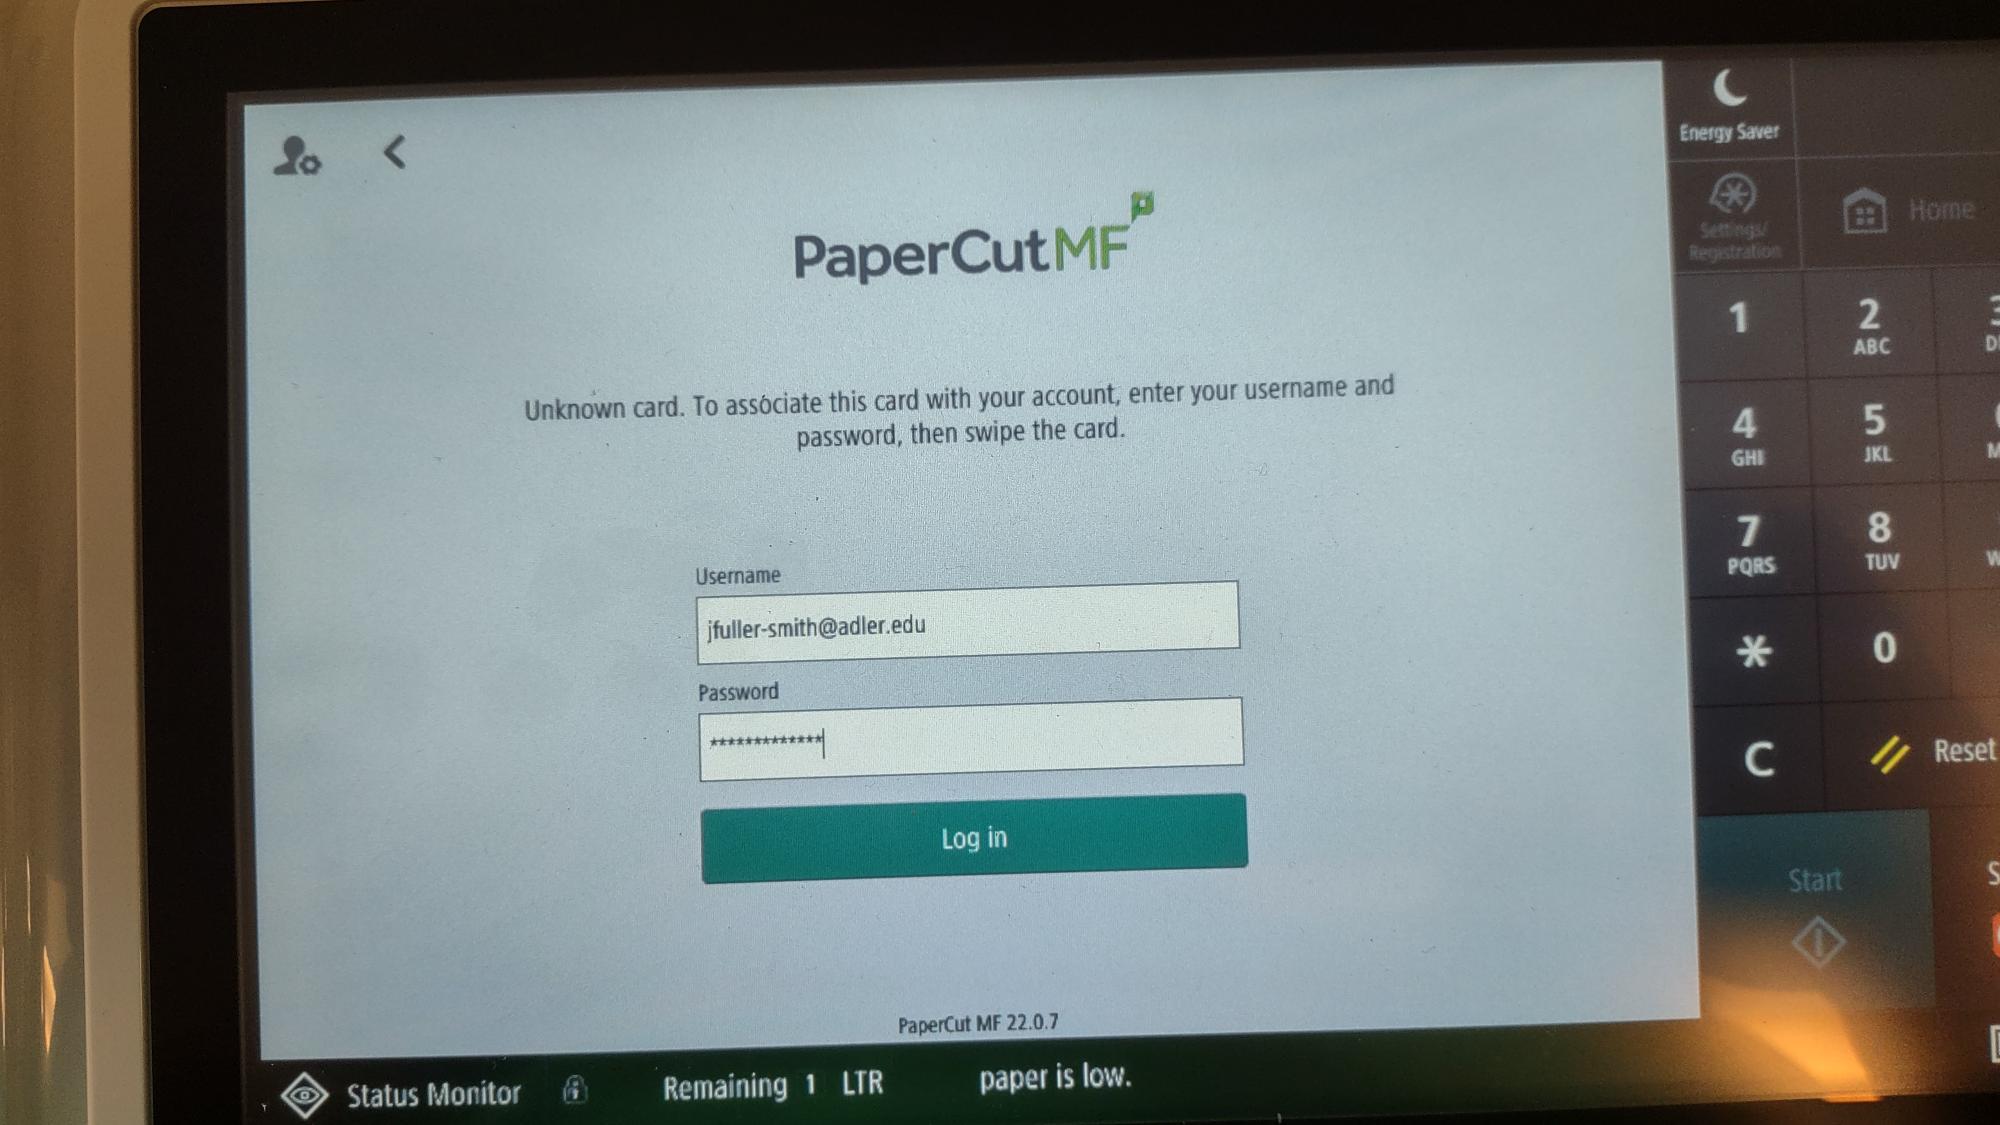 Printer login screen with a username and password entry field, followed by a green Log in button. Accompanying these fields is the message "Unknown card. To associate this card with your account, enter your username and password, then swipe the card."